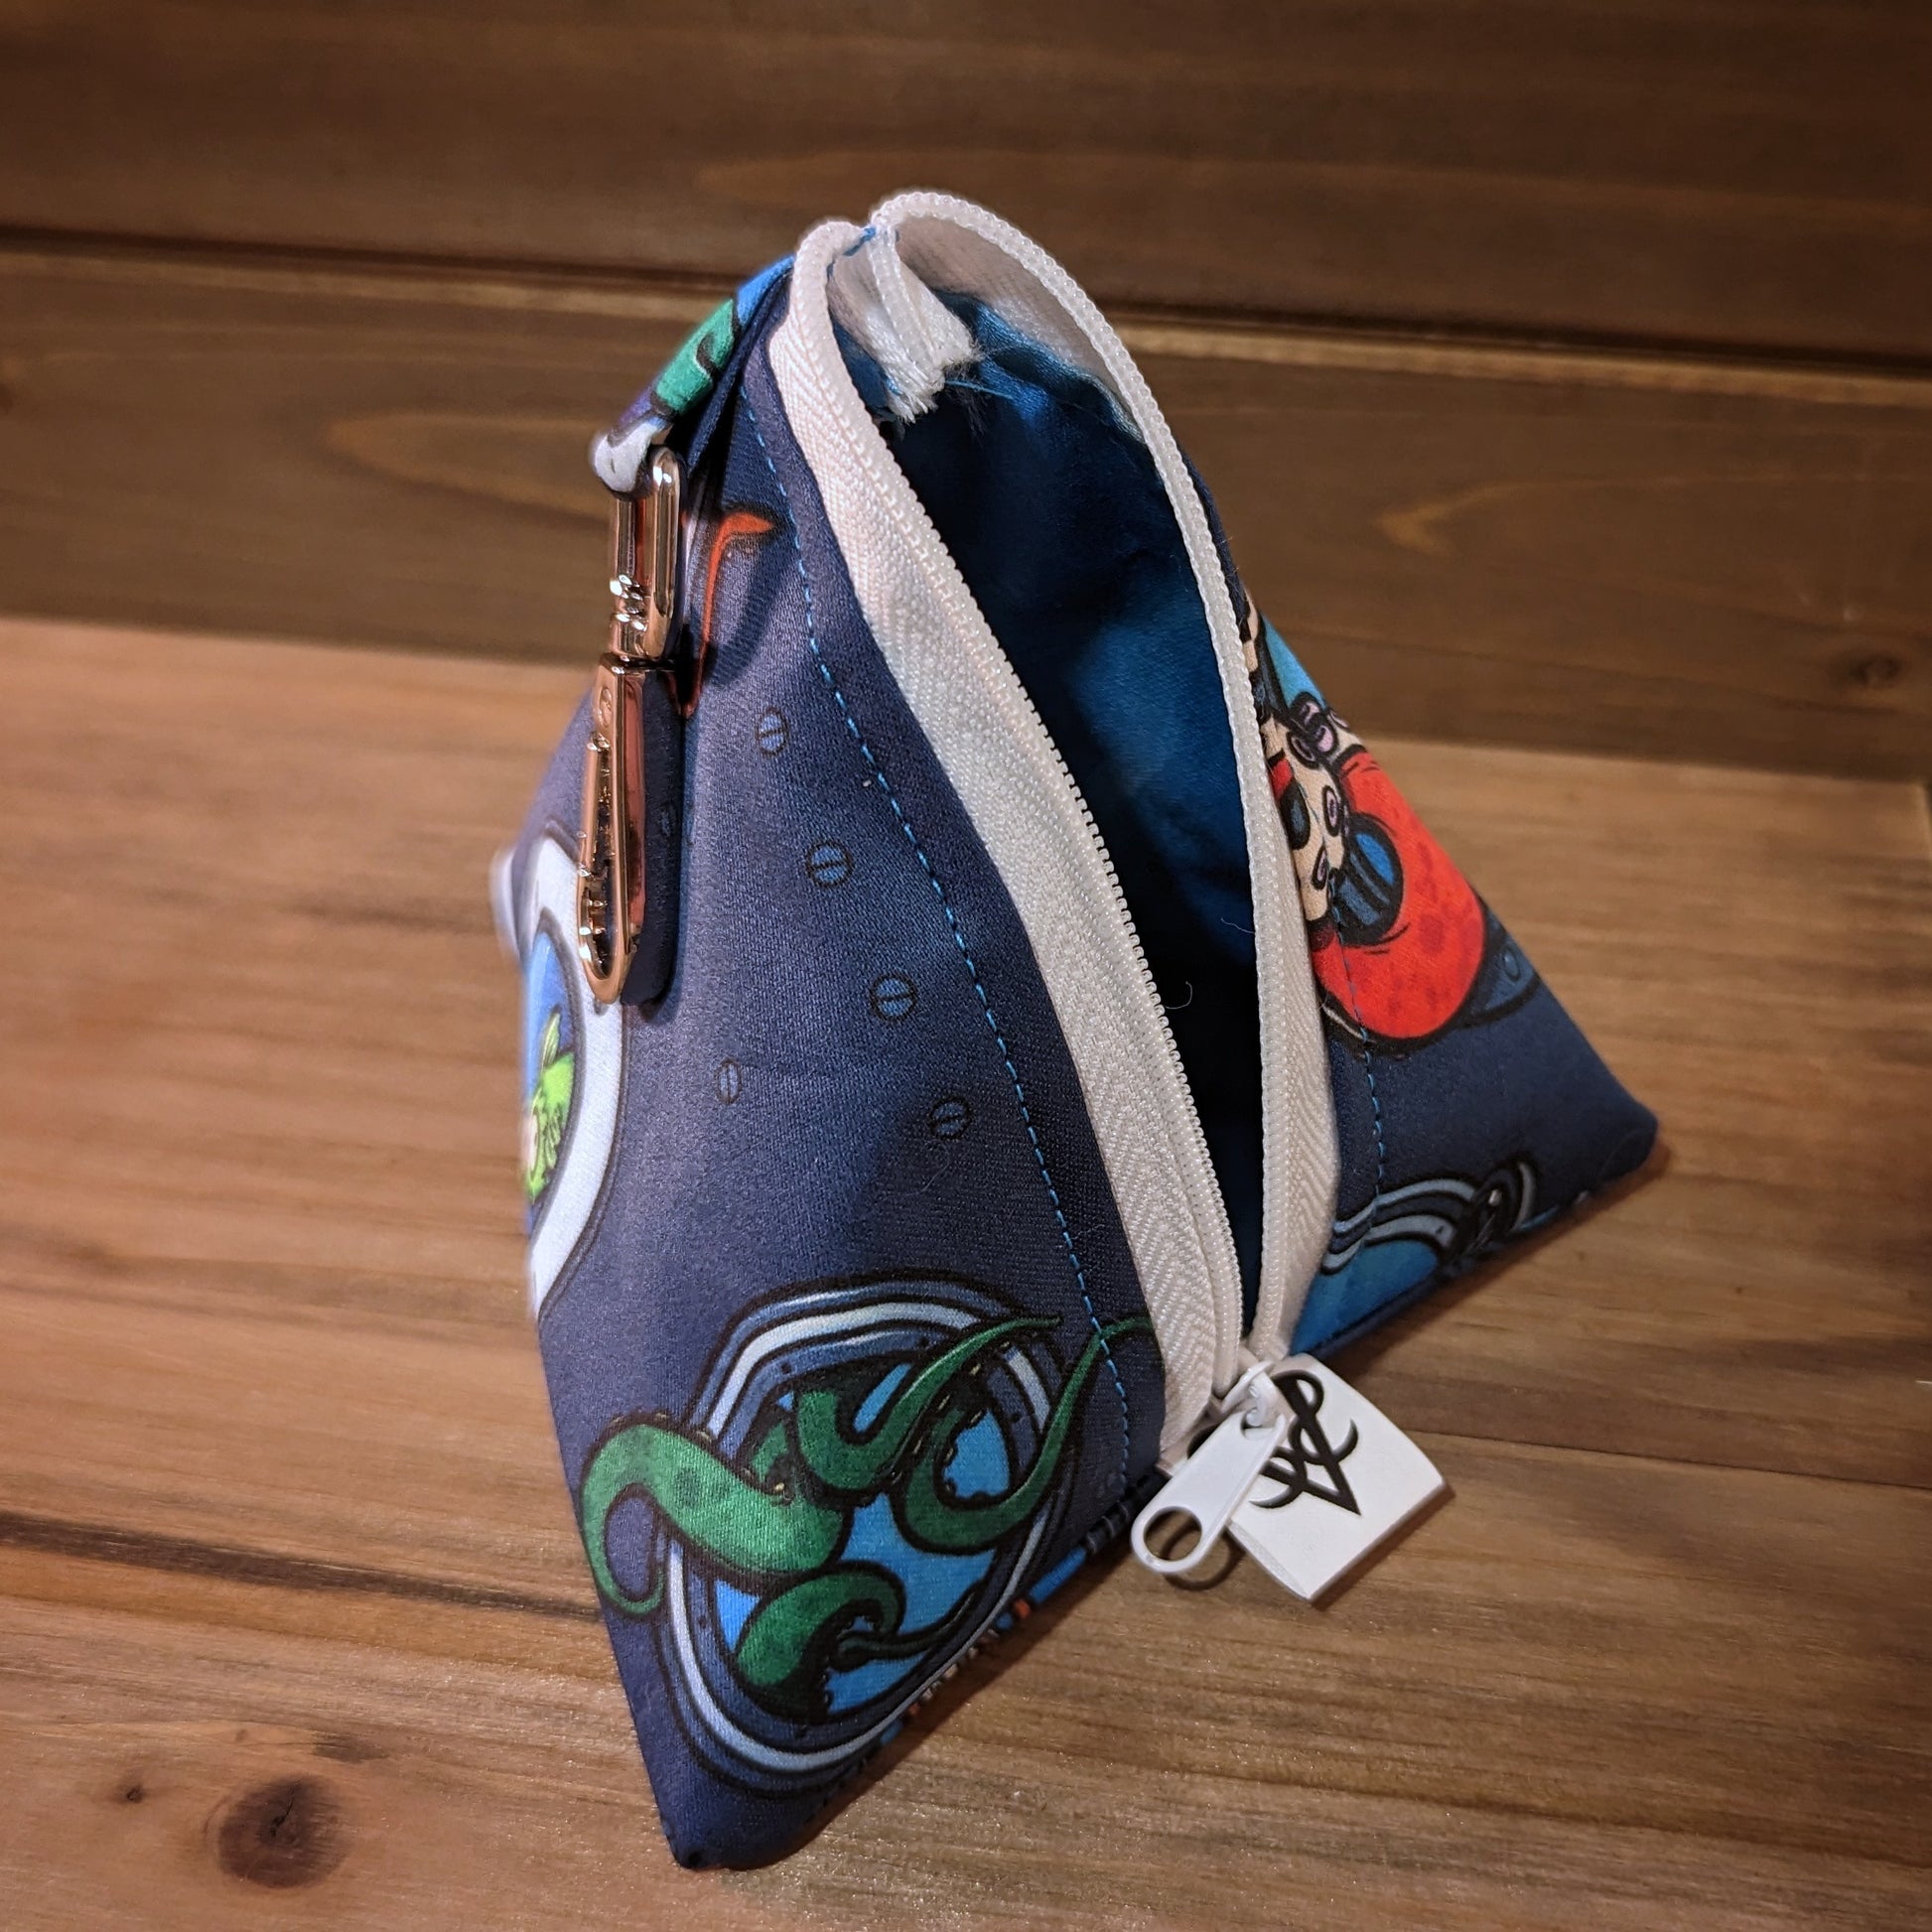 A 5 inch D4 bag has an print that looks like the inside of a submarine with tentacles breaching portholes near a nervous looking fish, a white zipper open to show a water print interior, and a keychain clip.